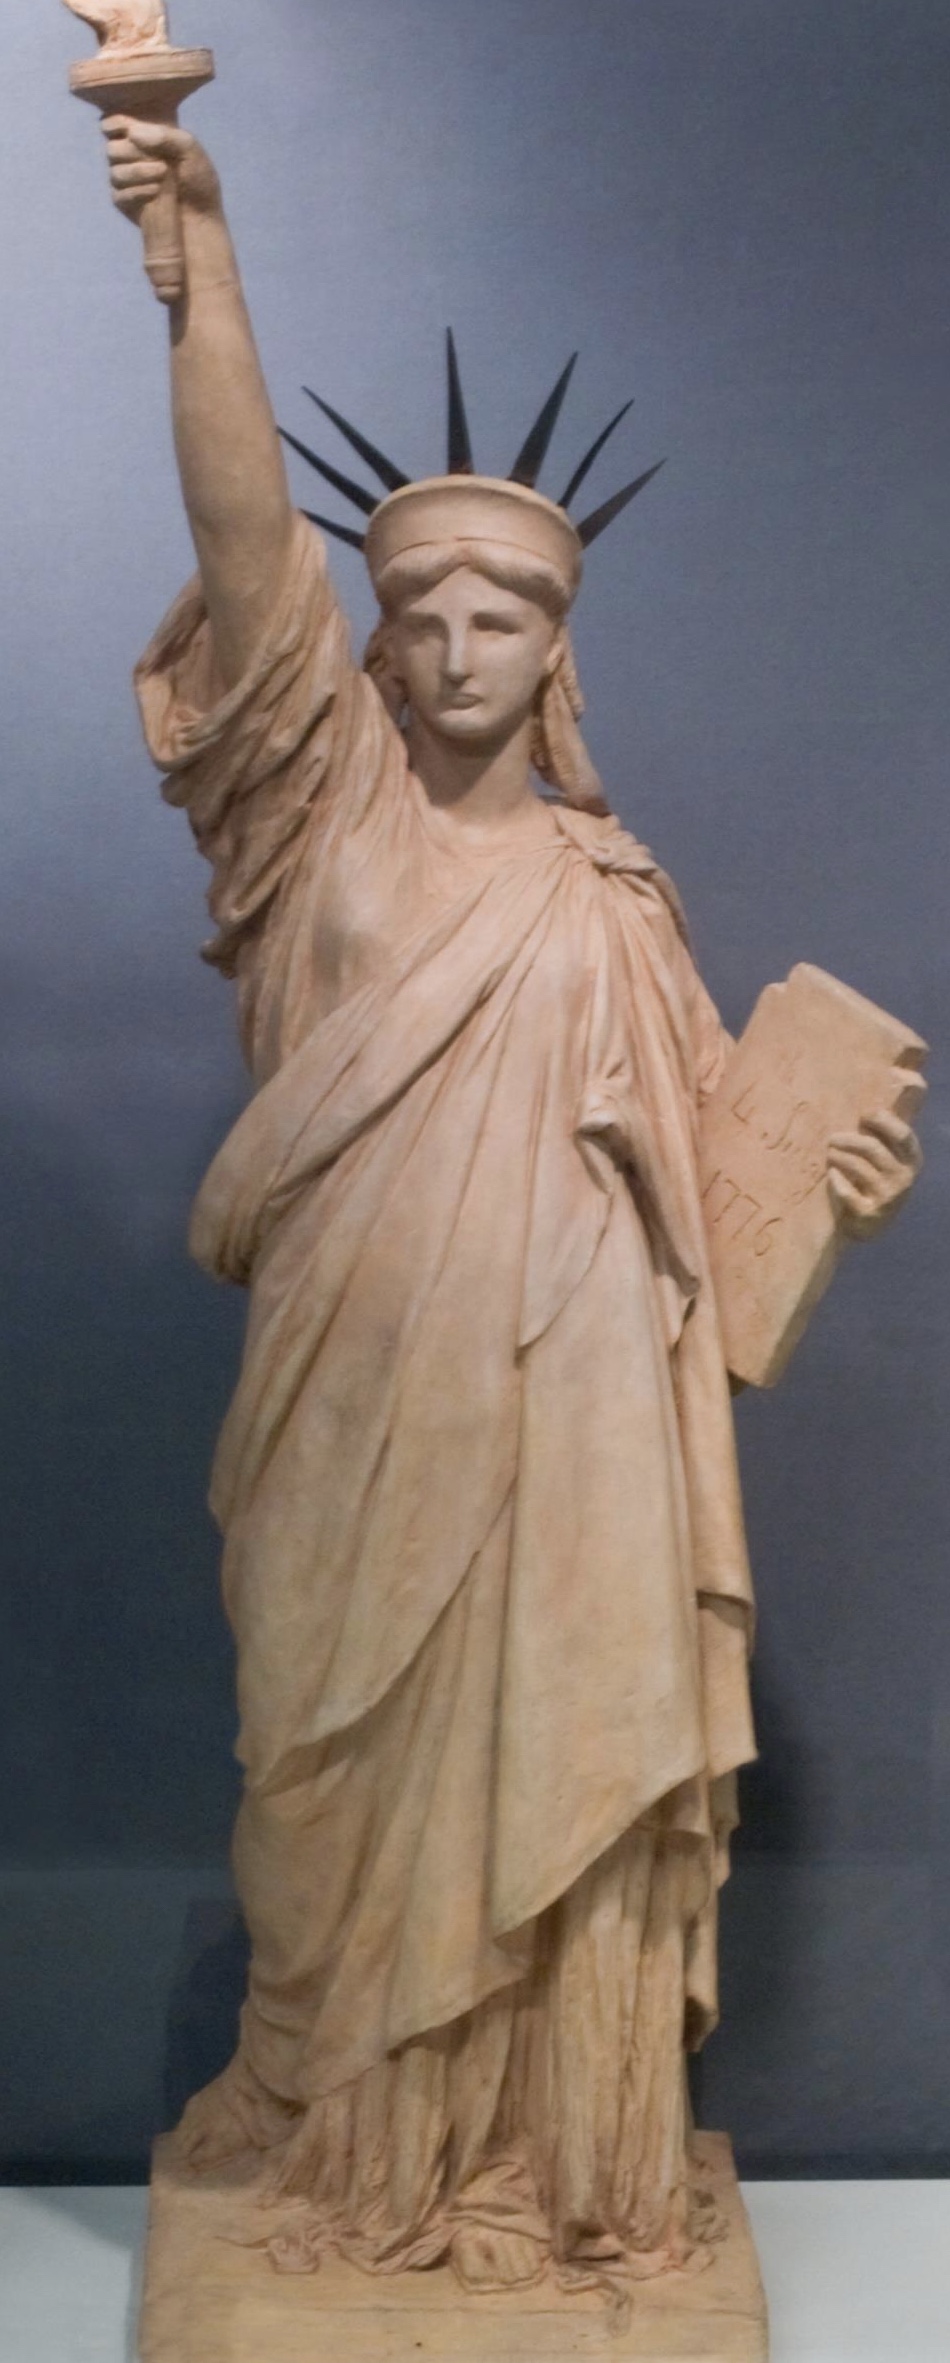 Study Model of the Statue of Liberty 

